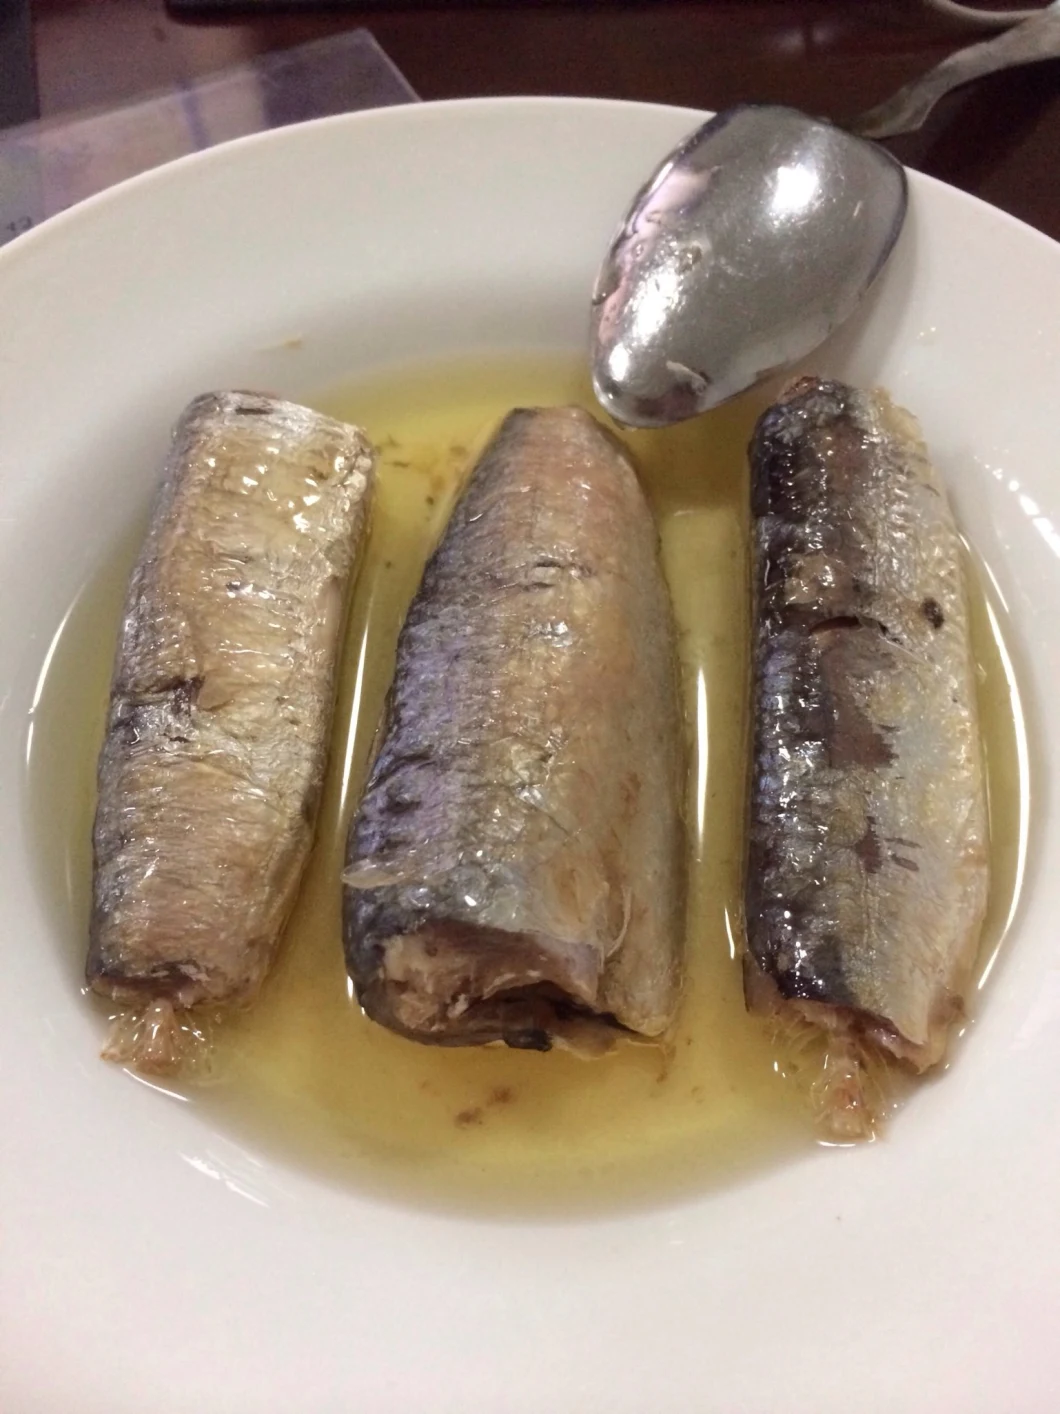 Hot Selling Canned Fish Canned Sardines in Vegetable Oil 155g